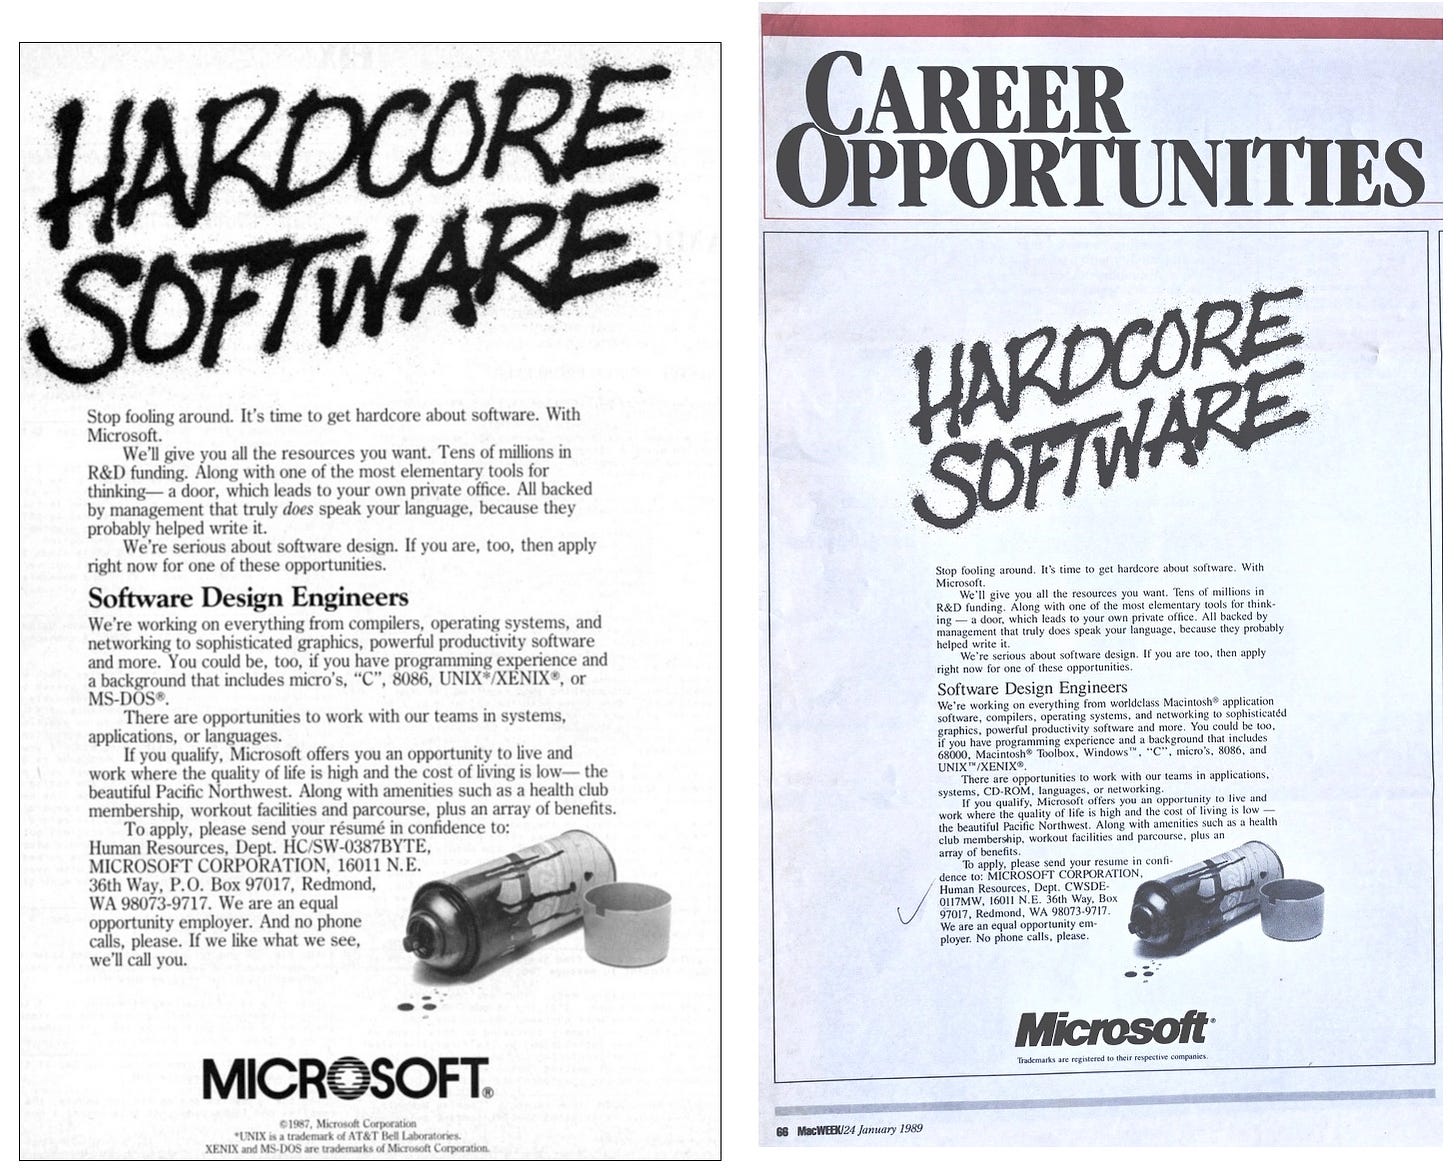 Hardcore Software career opportunity advertisements.